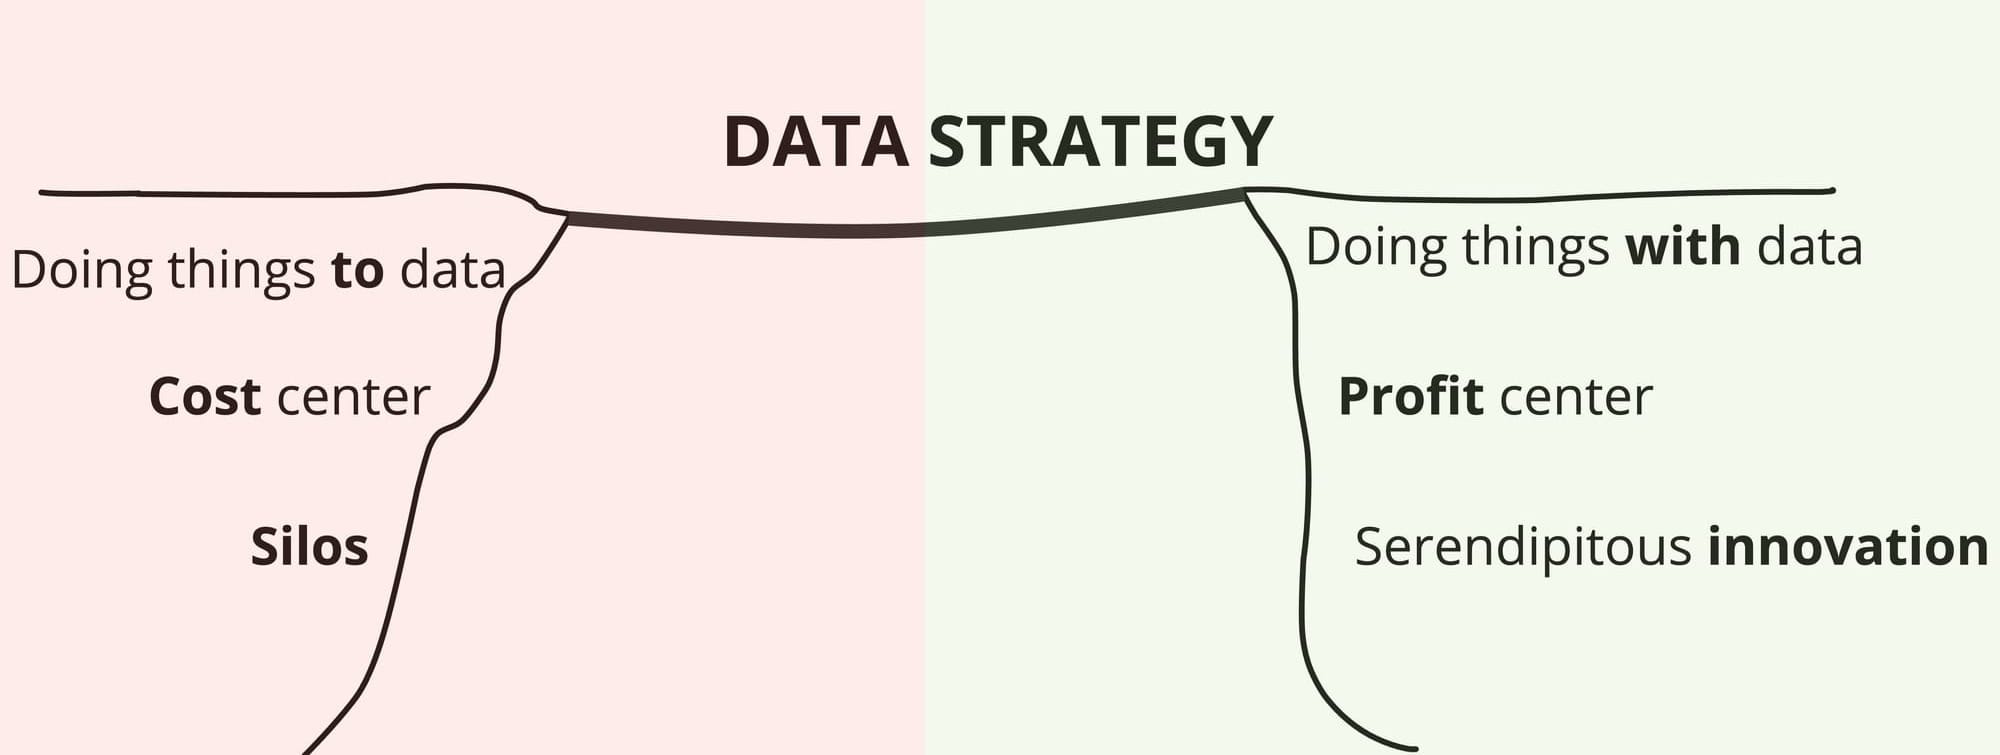 Data strategy: why should you care?